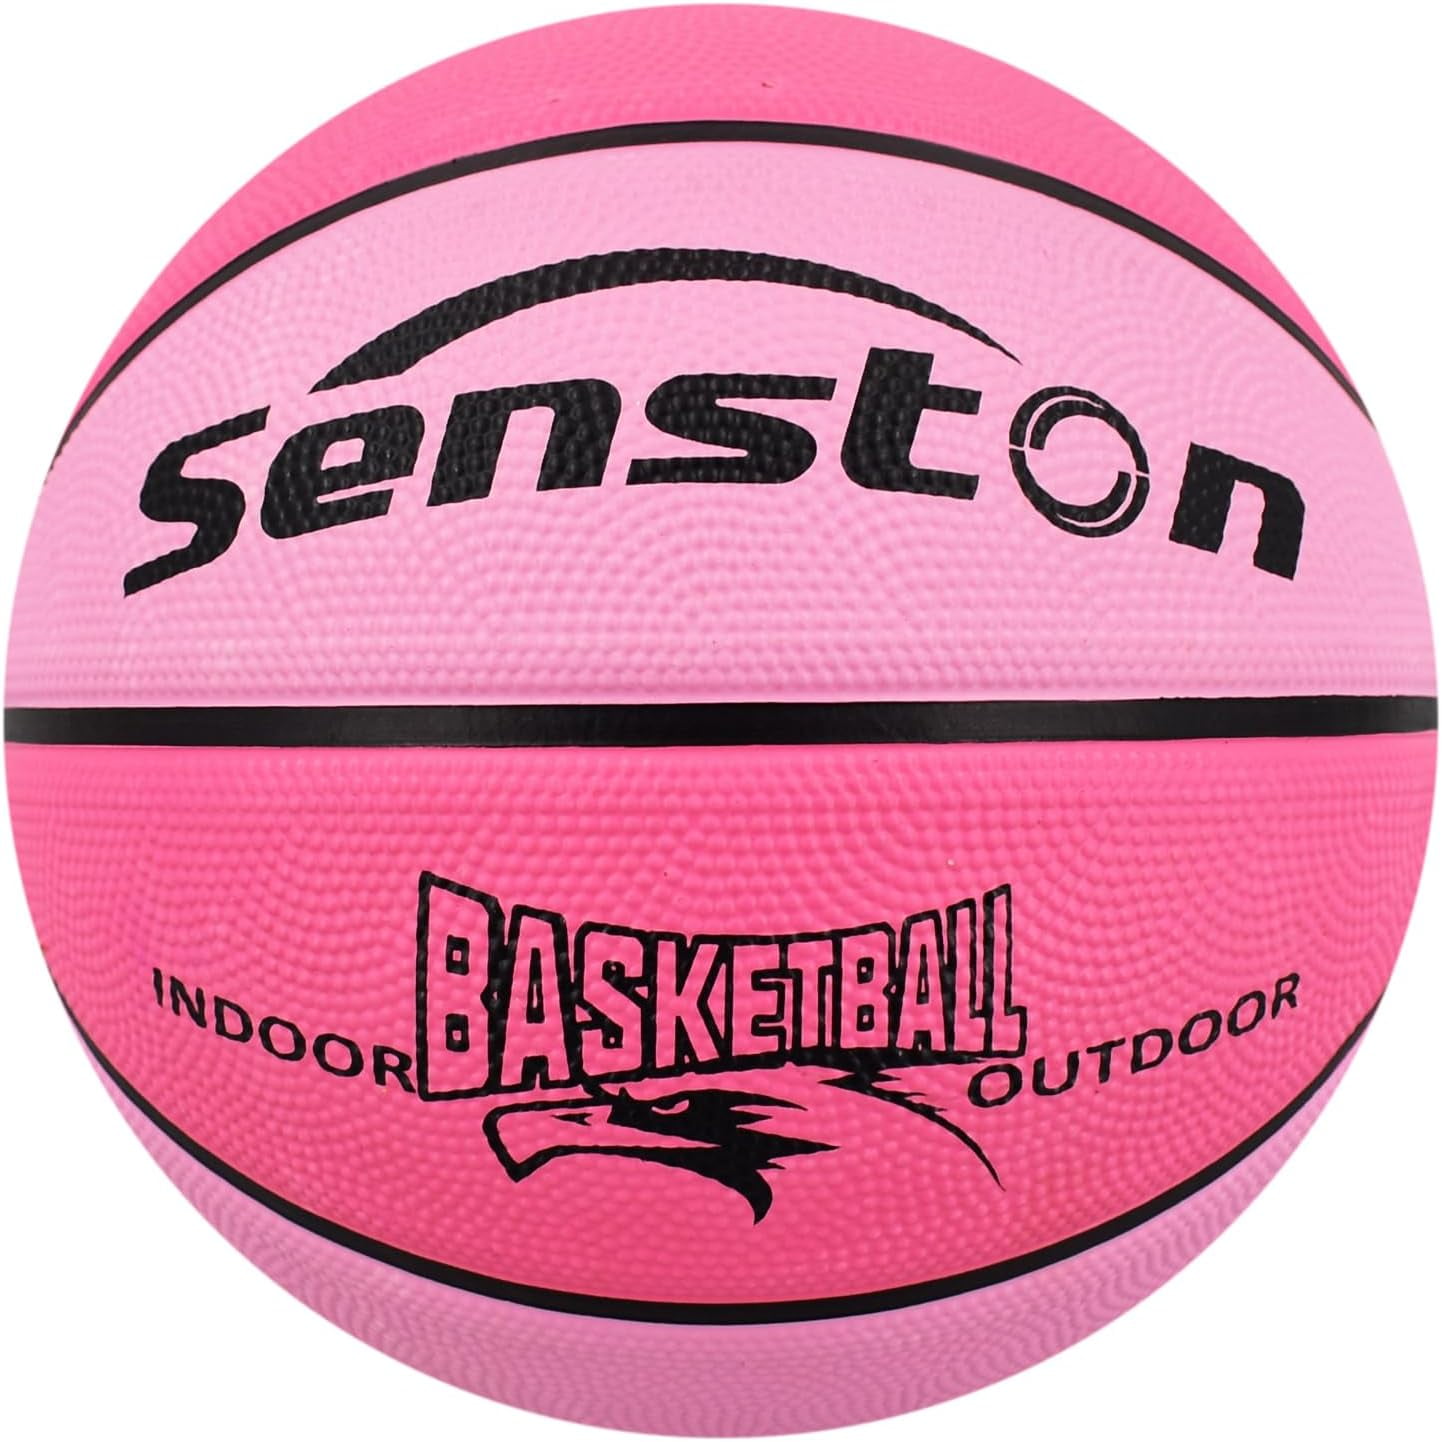 Kids Basketball Size 2/3/4, Youth Basketball Size 5 (27.5), Women Pink  Basketball Size 6 for Indoor Outdoor Play Basket Ball Game, Street Training